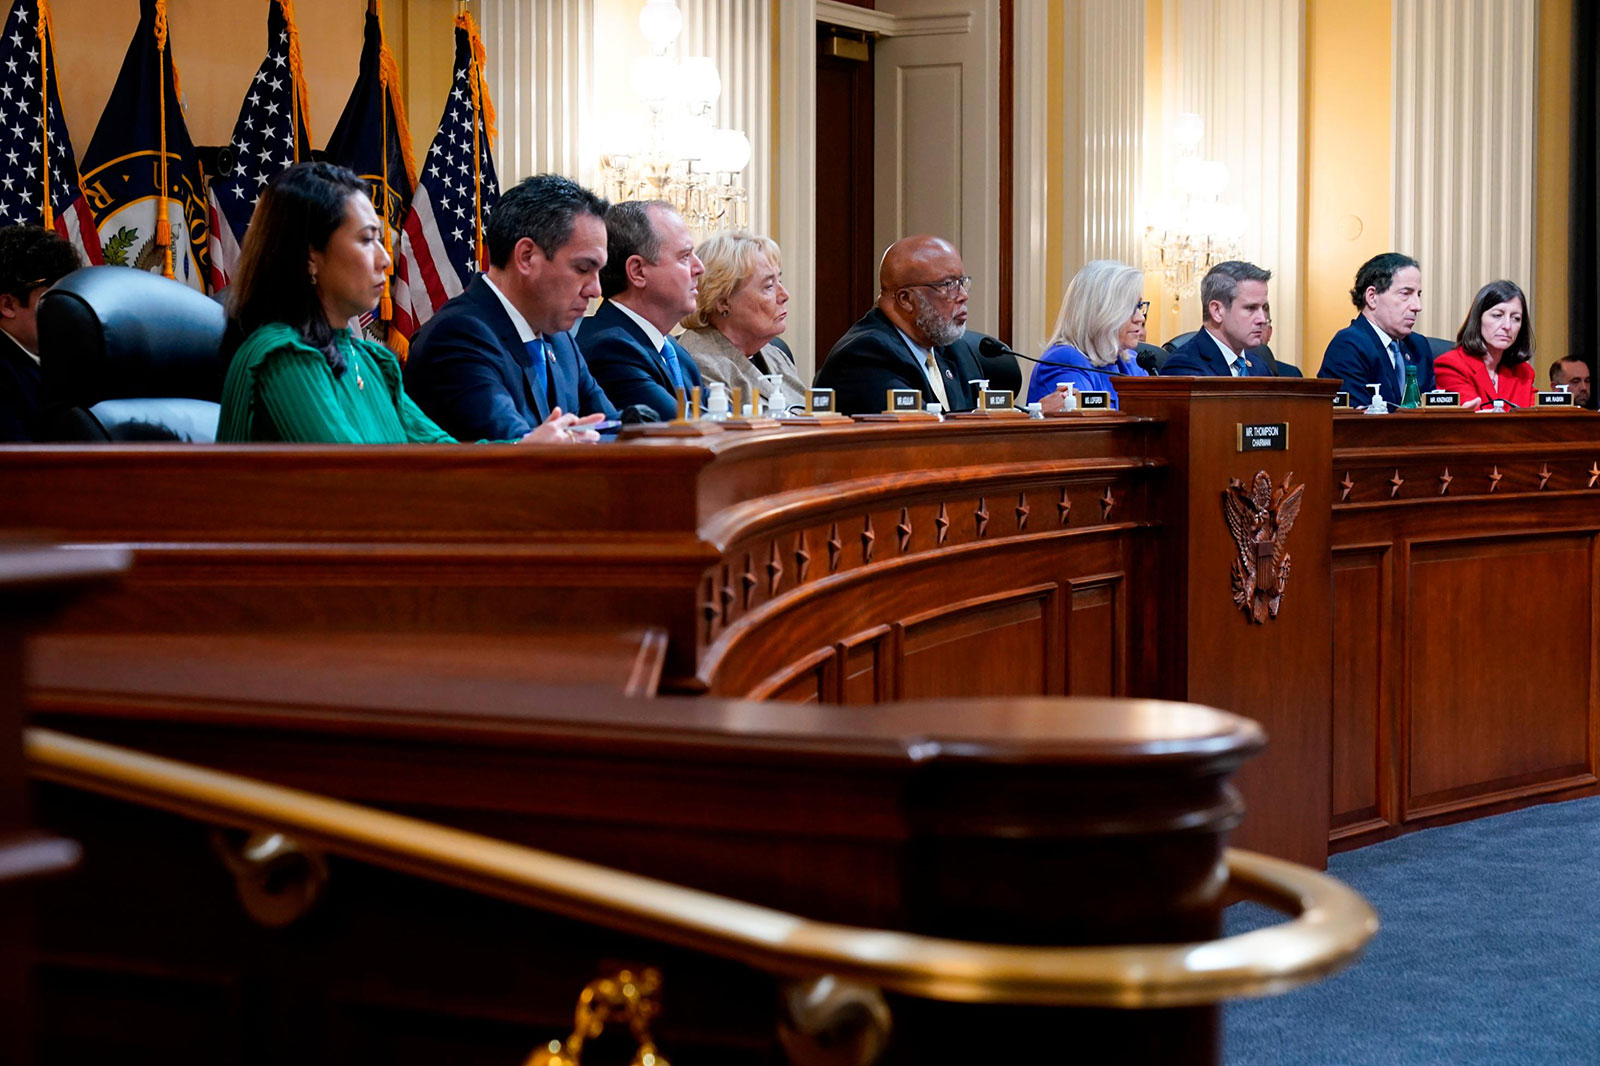 From left to right, Rep. Stephanie Murphy, Rep. Pete Aguilar, Rep. Adam Schiff, Rep. Zoe Lofgren, Chair Rep. Bennie Thompson, Vice chair Rep. Liz Cheney, Rep. Adam Kinzinger, Rep. Jamie Raskin and Rep. Elaine Luria are seated in the House select committee hearing on June 9. 